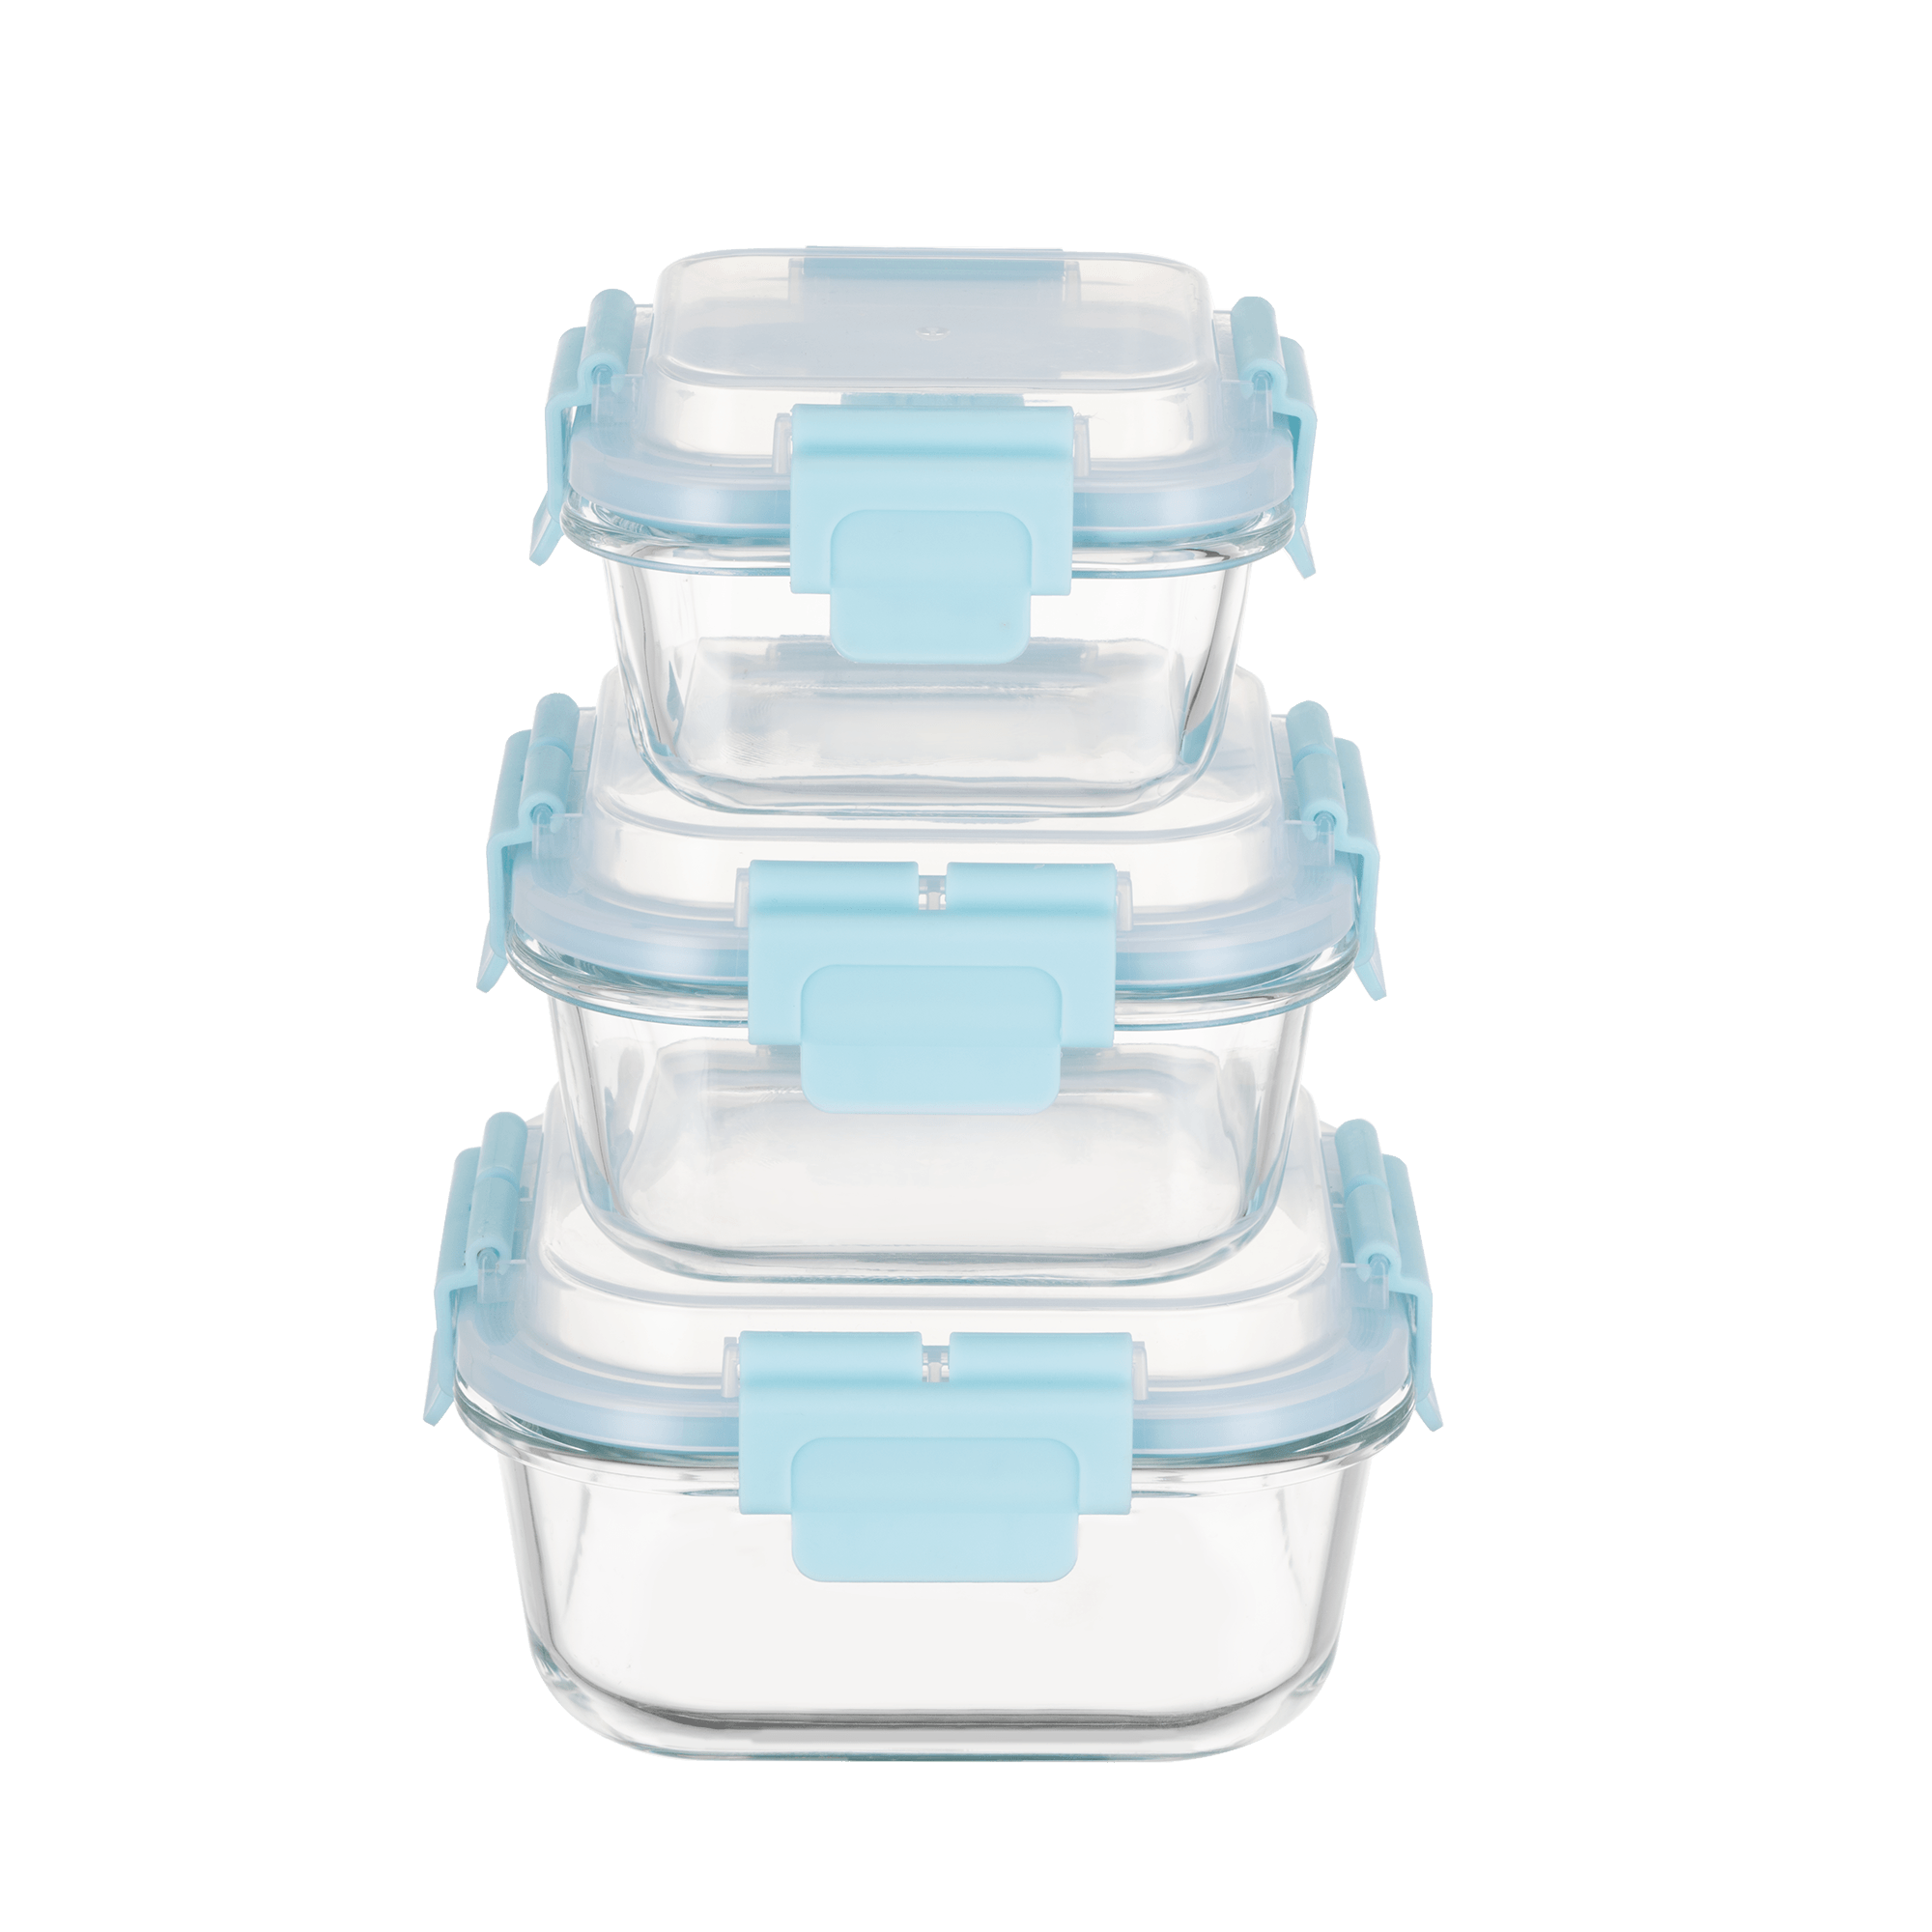 TAREE™ HI-TOP Lids With Pro Grade Removable Lockdown Levers (Square 3 container set) - GenicookGenicook